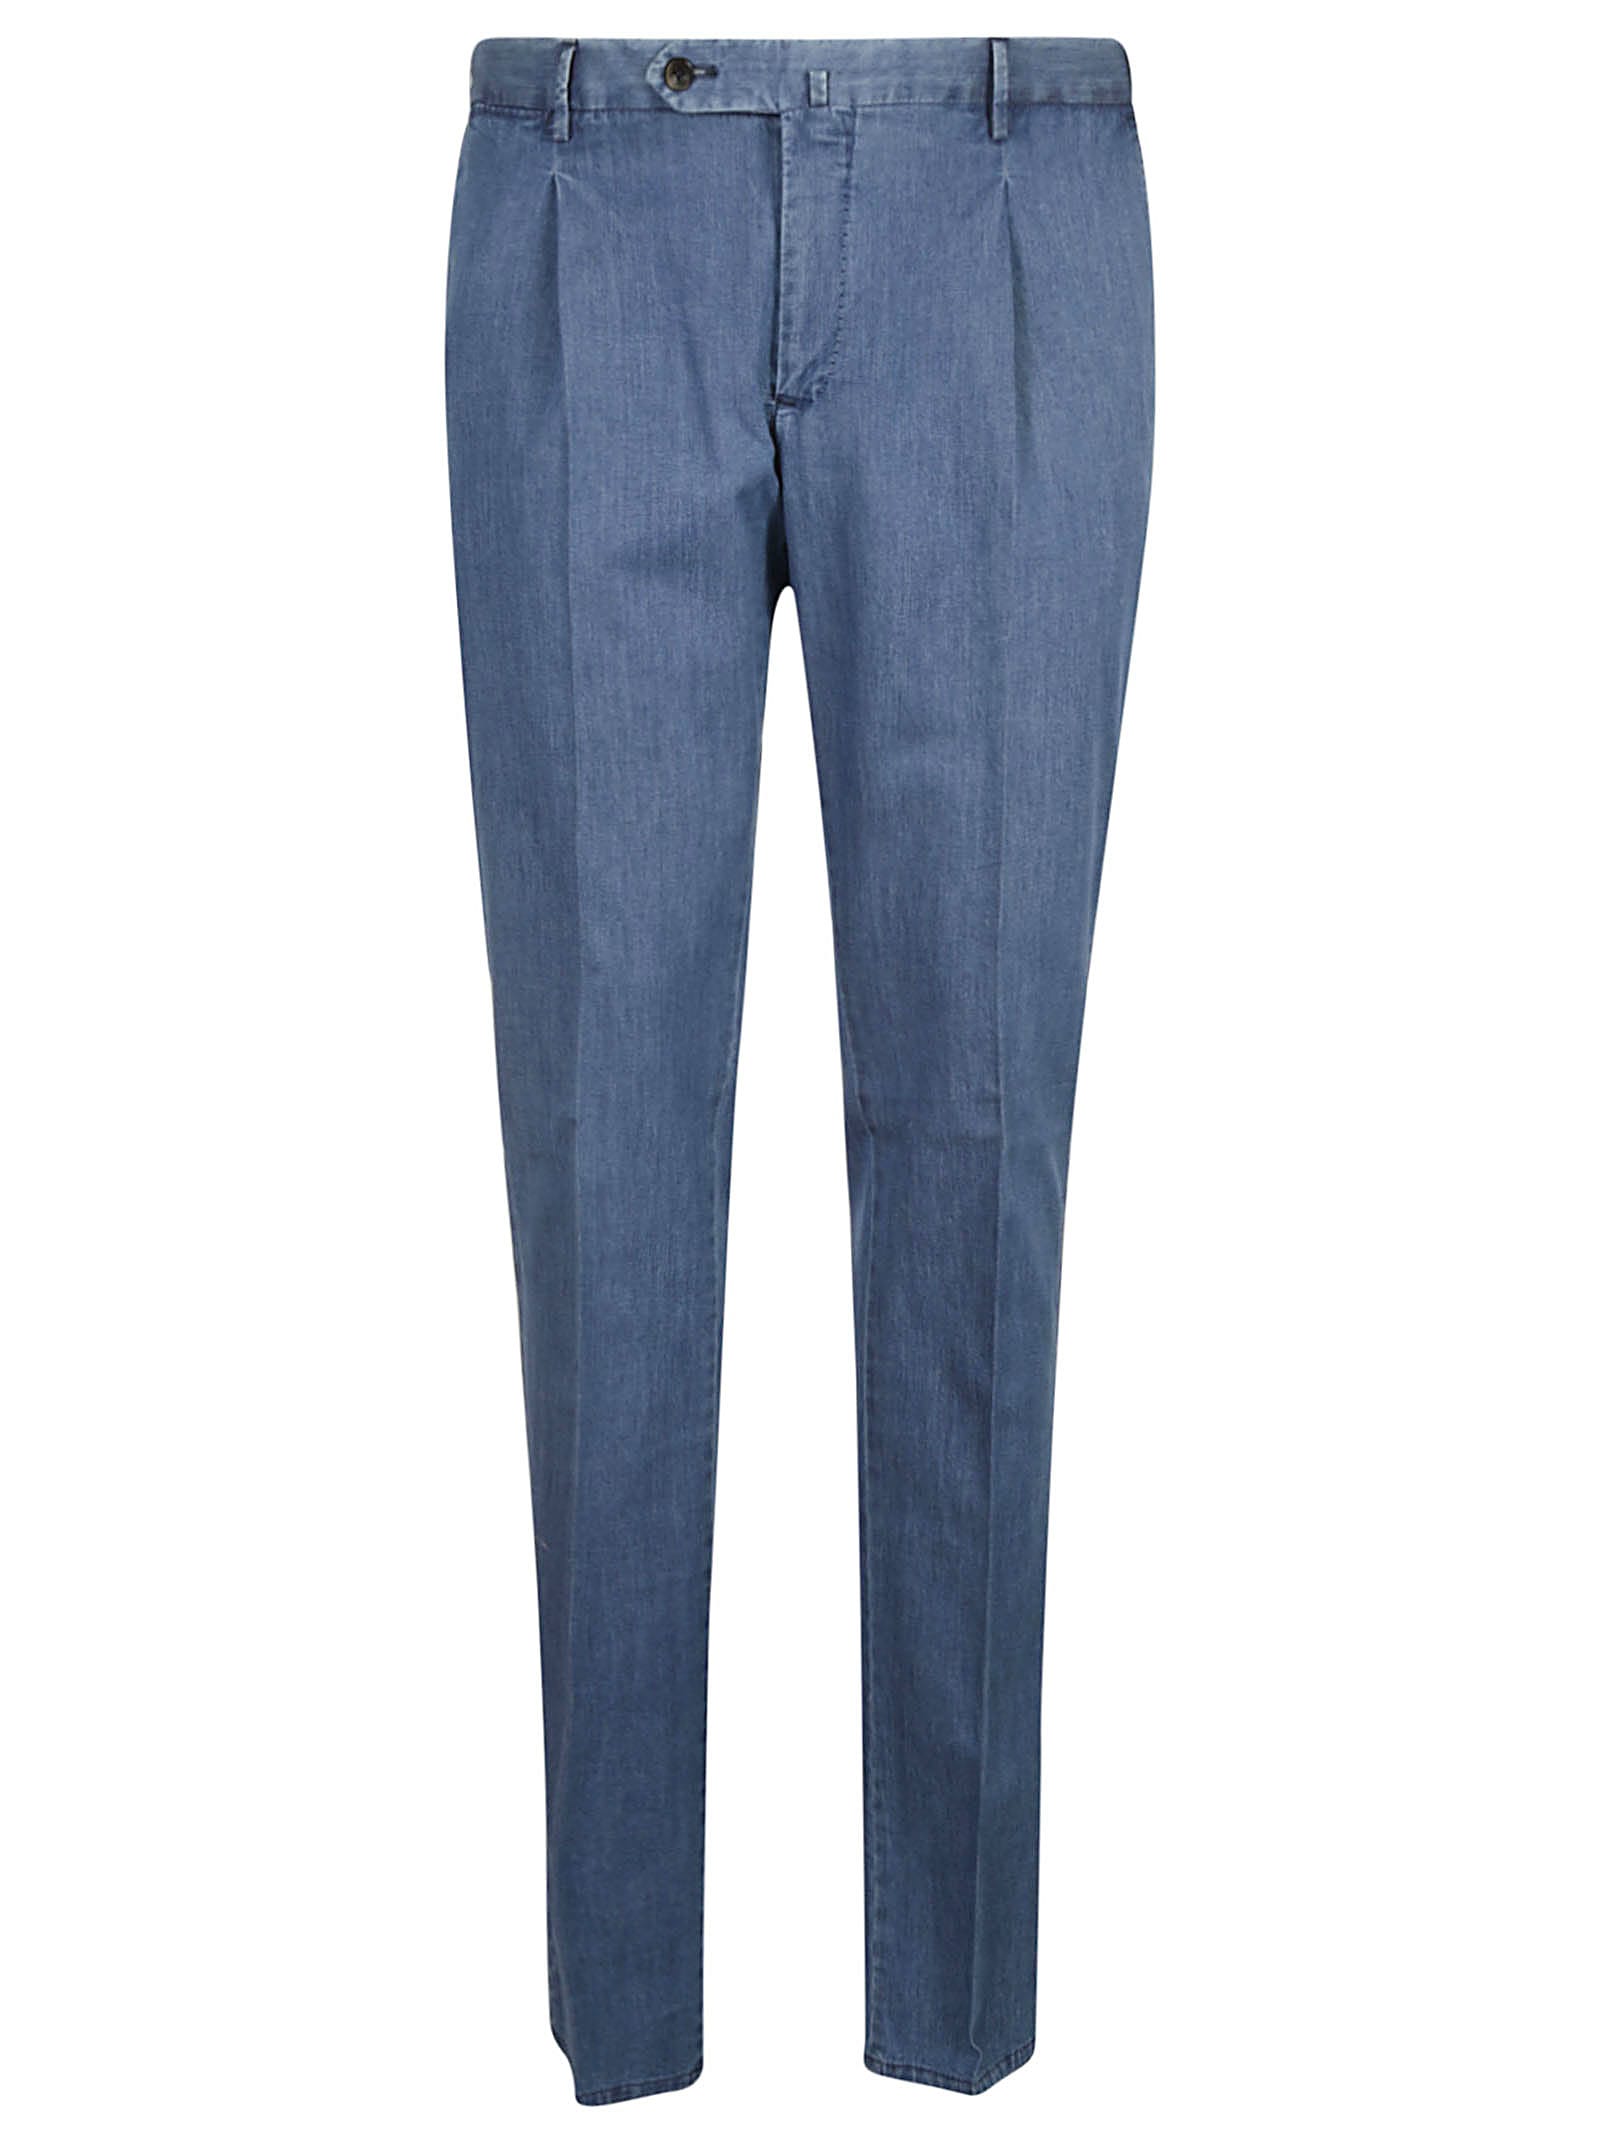 PT01 Denim Fitted Trousers